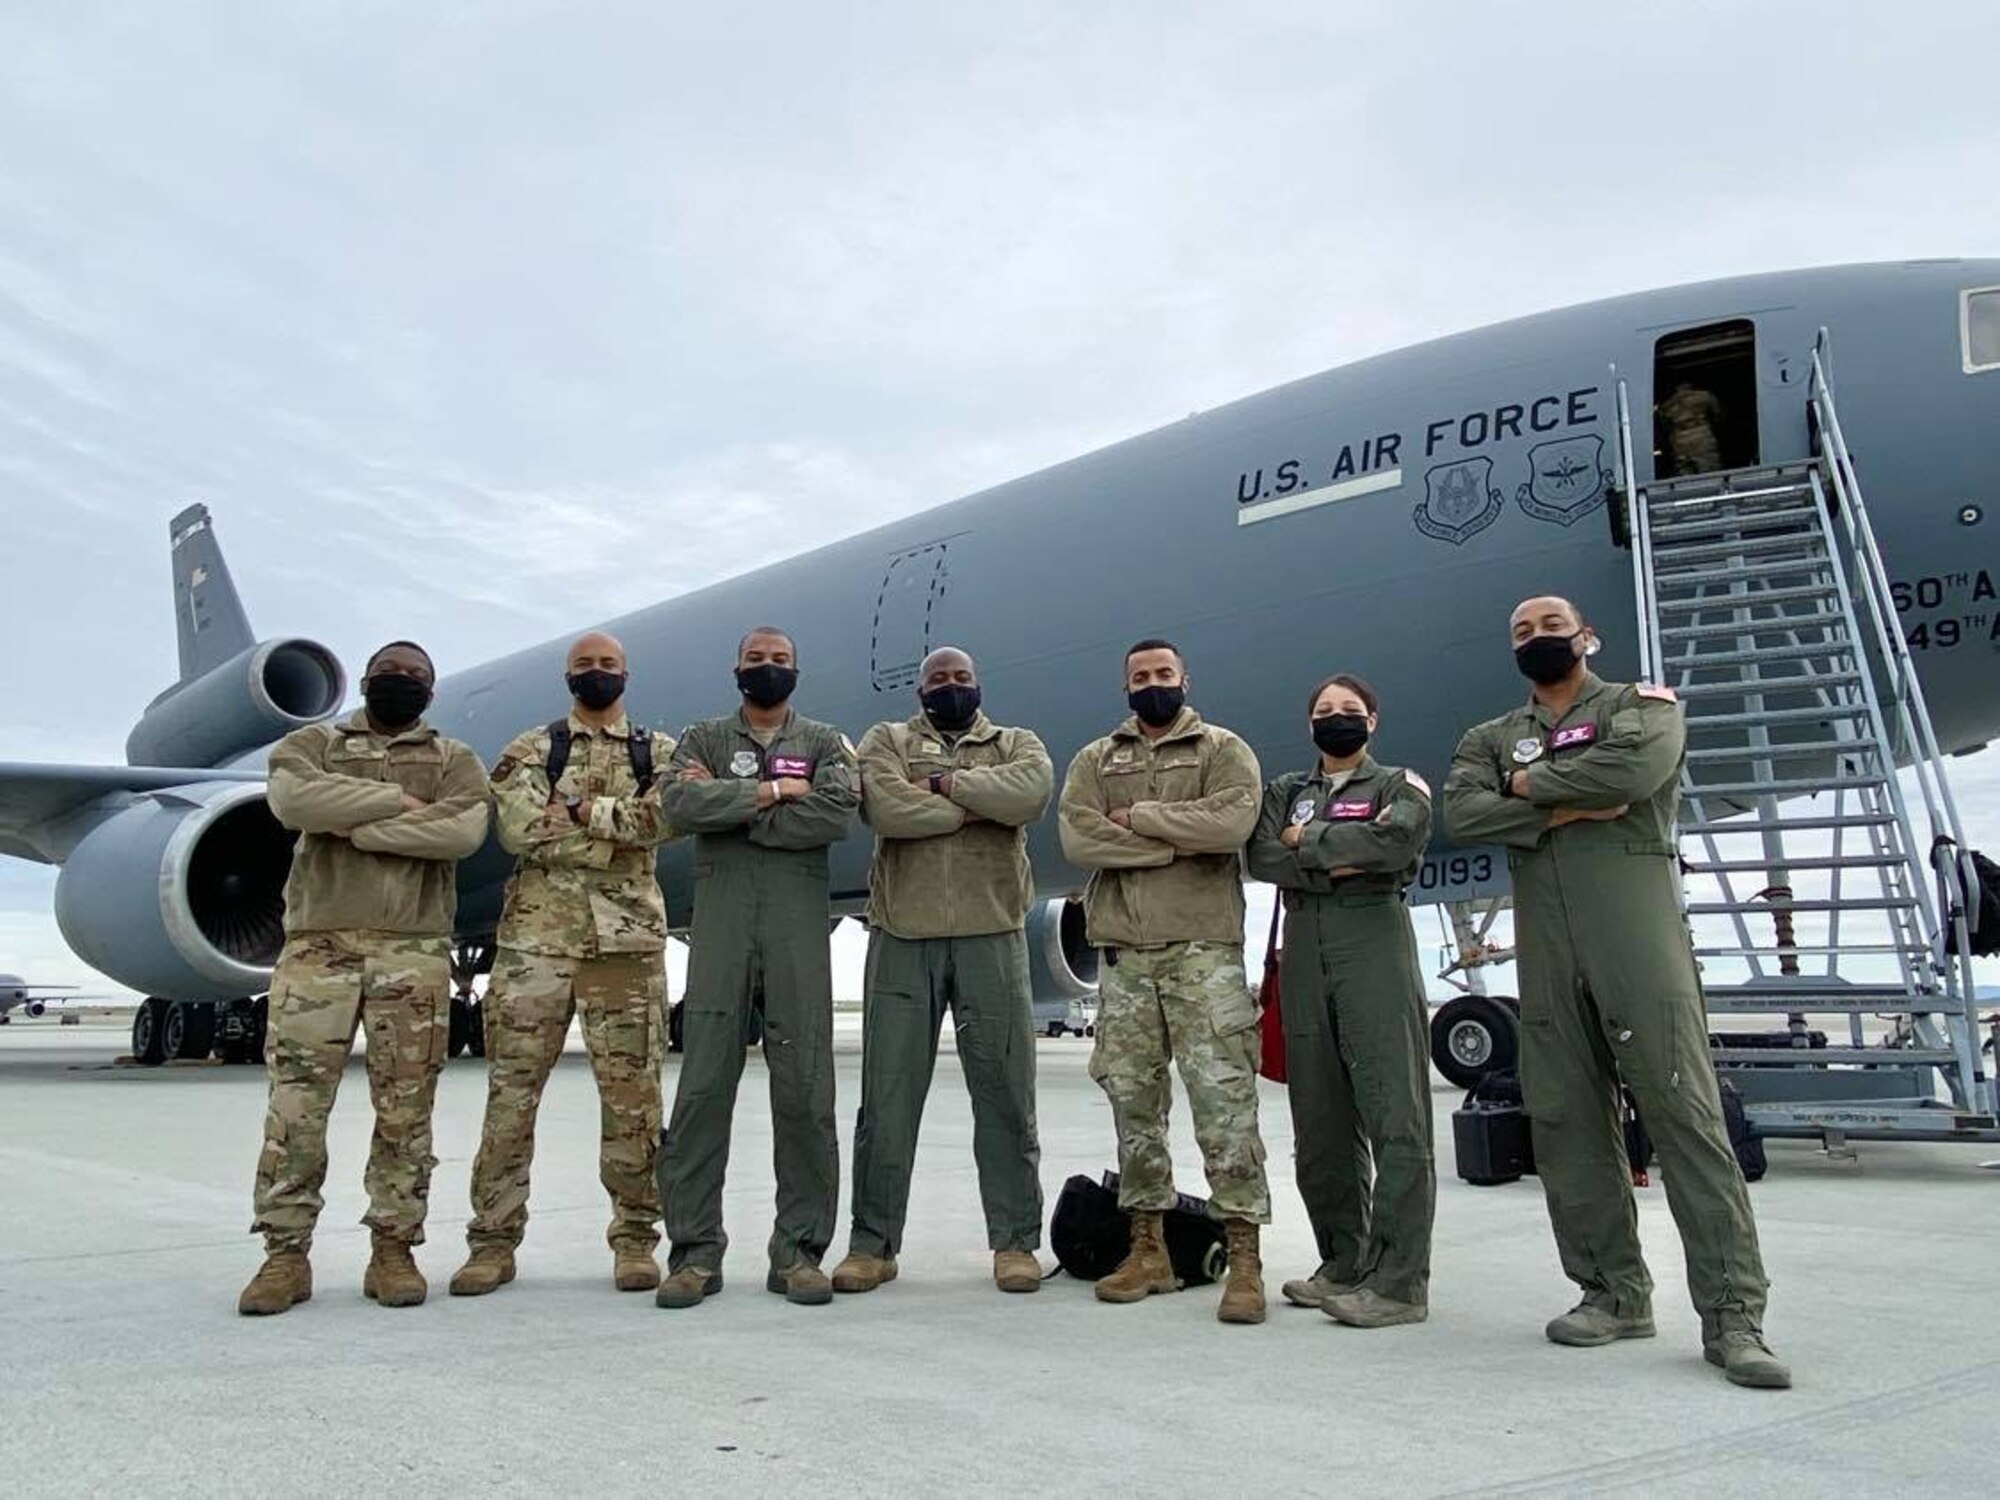 Military members in flight suits stand shoulder to shoulder in front of a KC-10 Extender aircraft